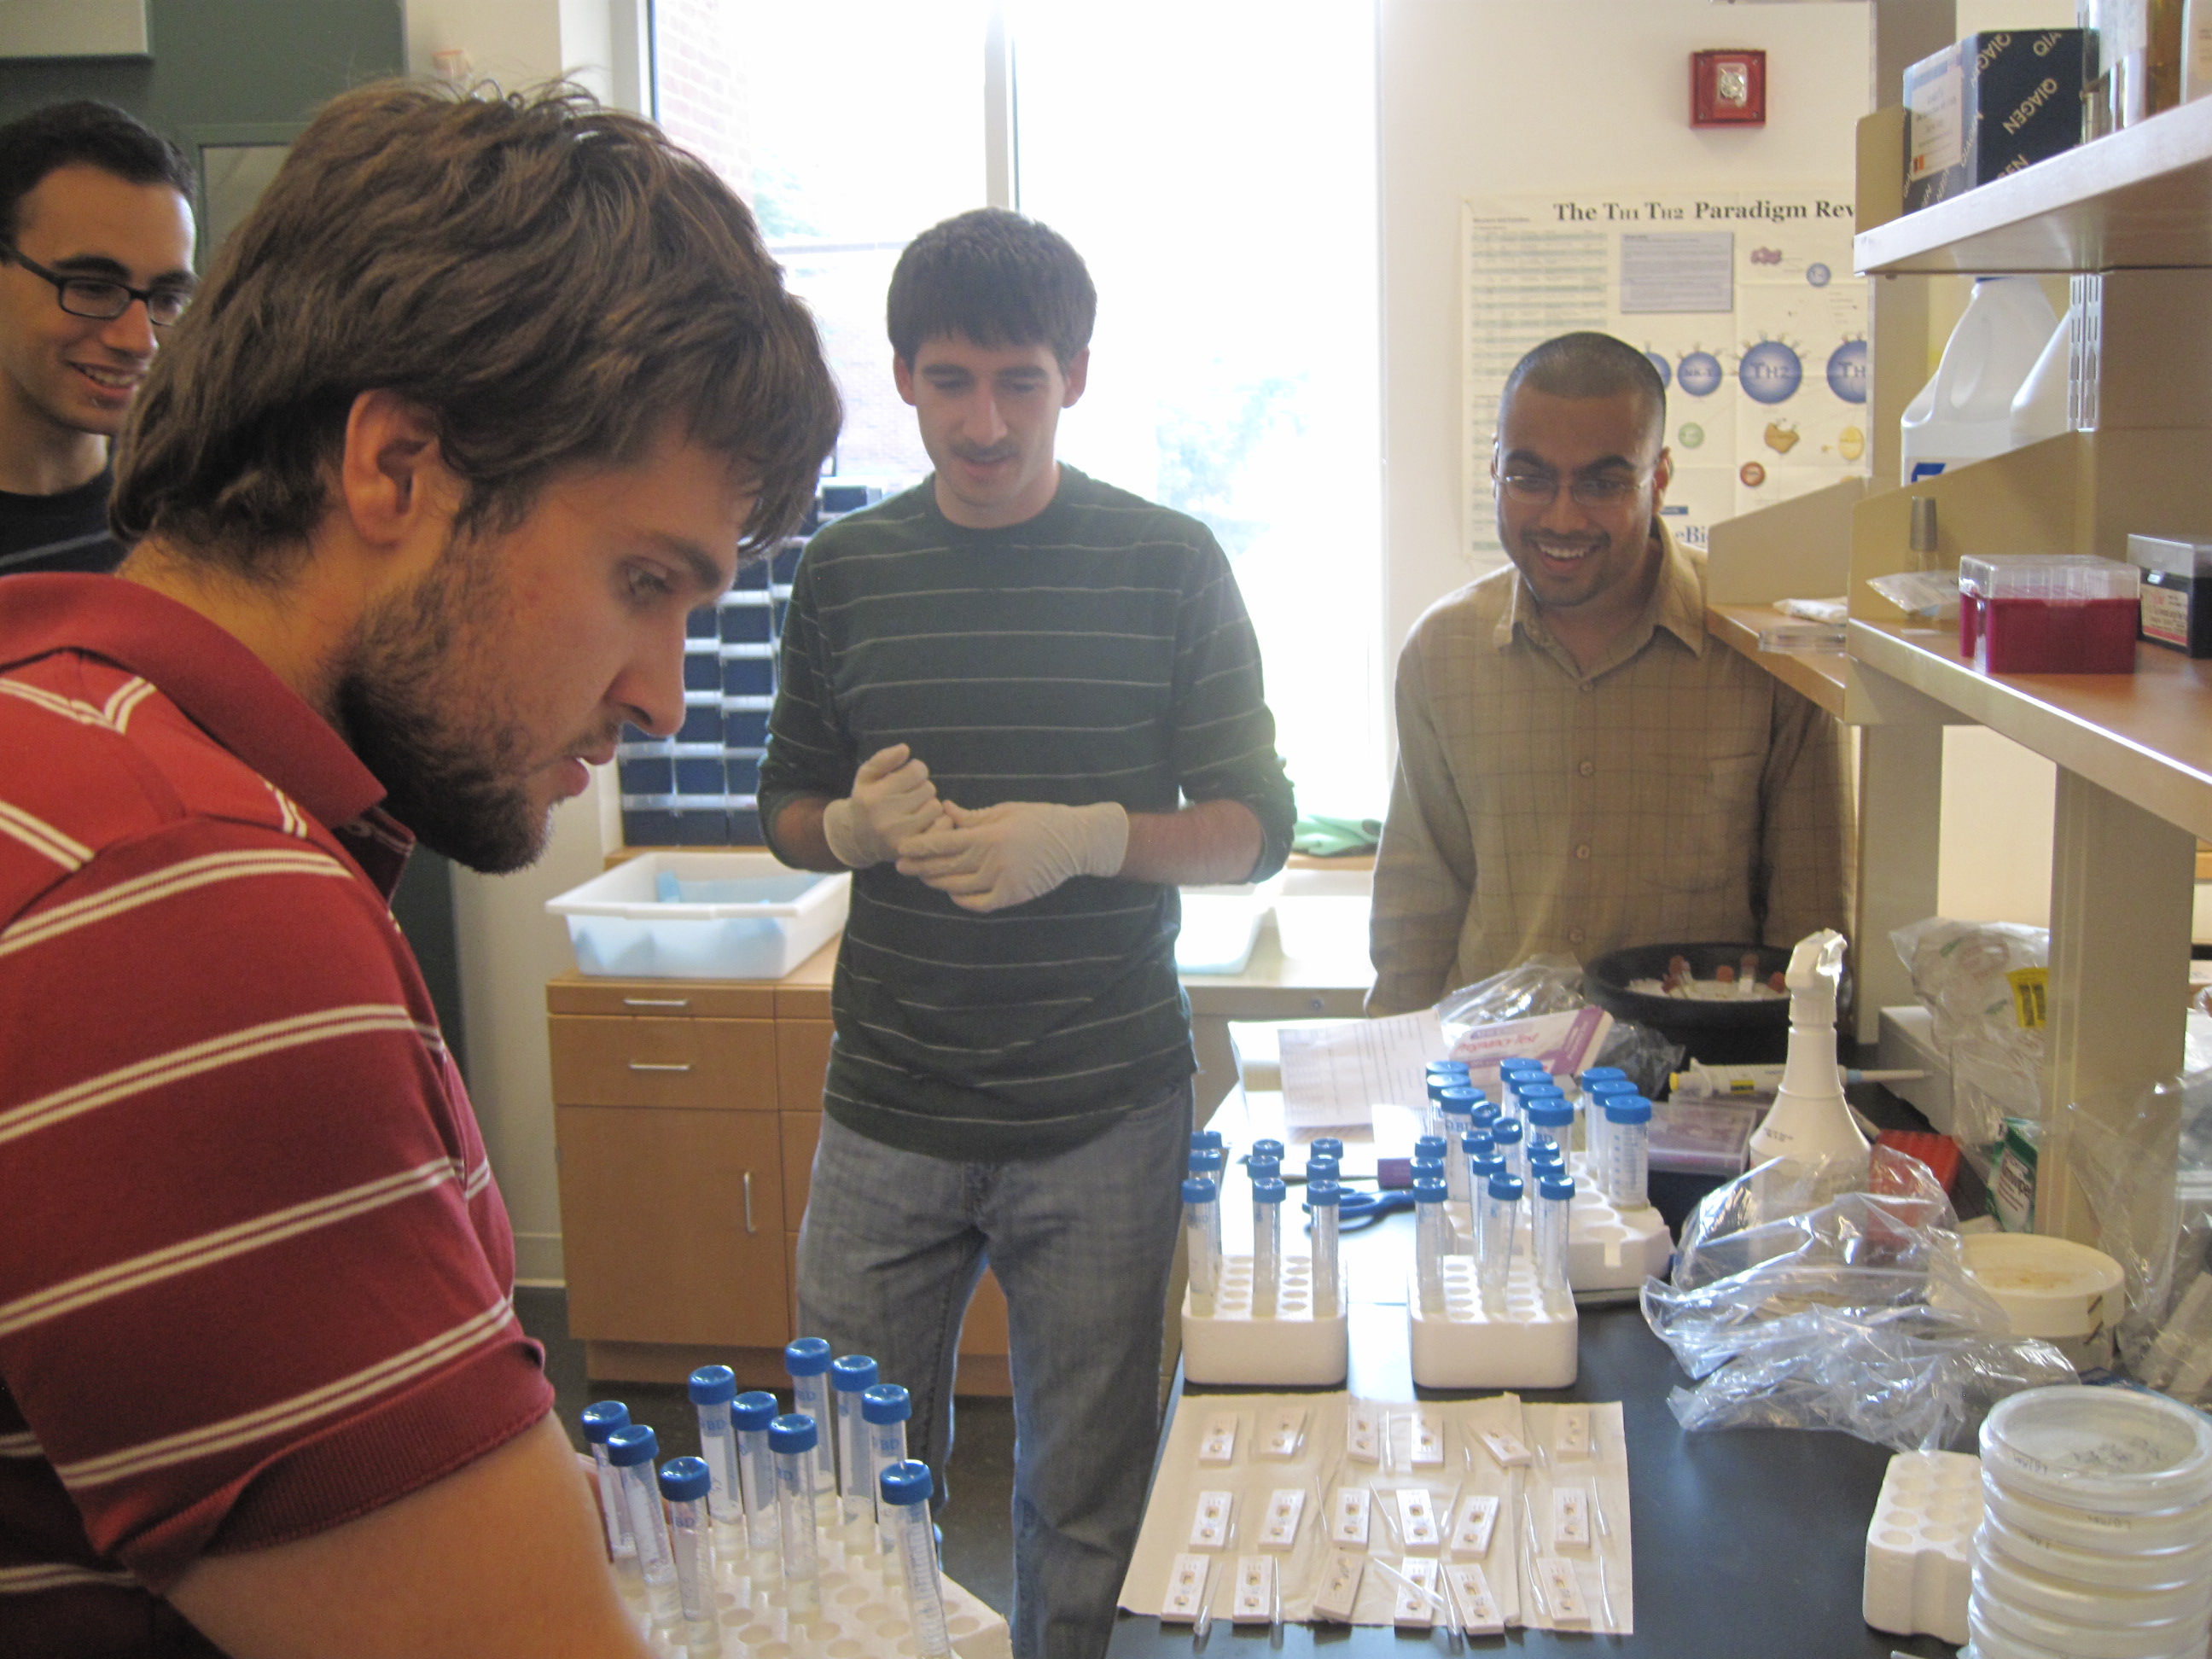 Students working in a lab together